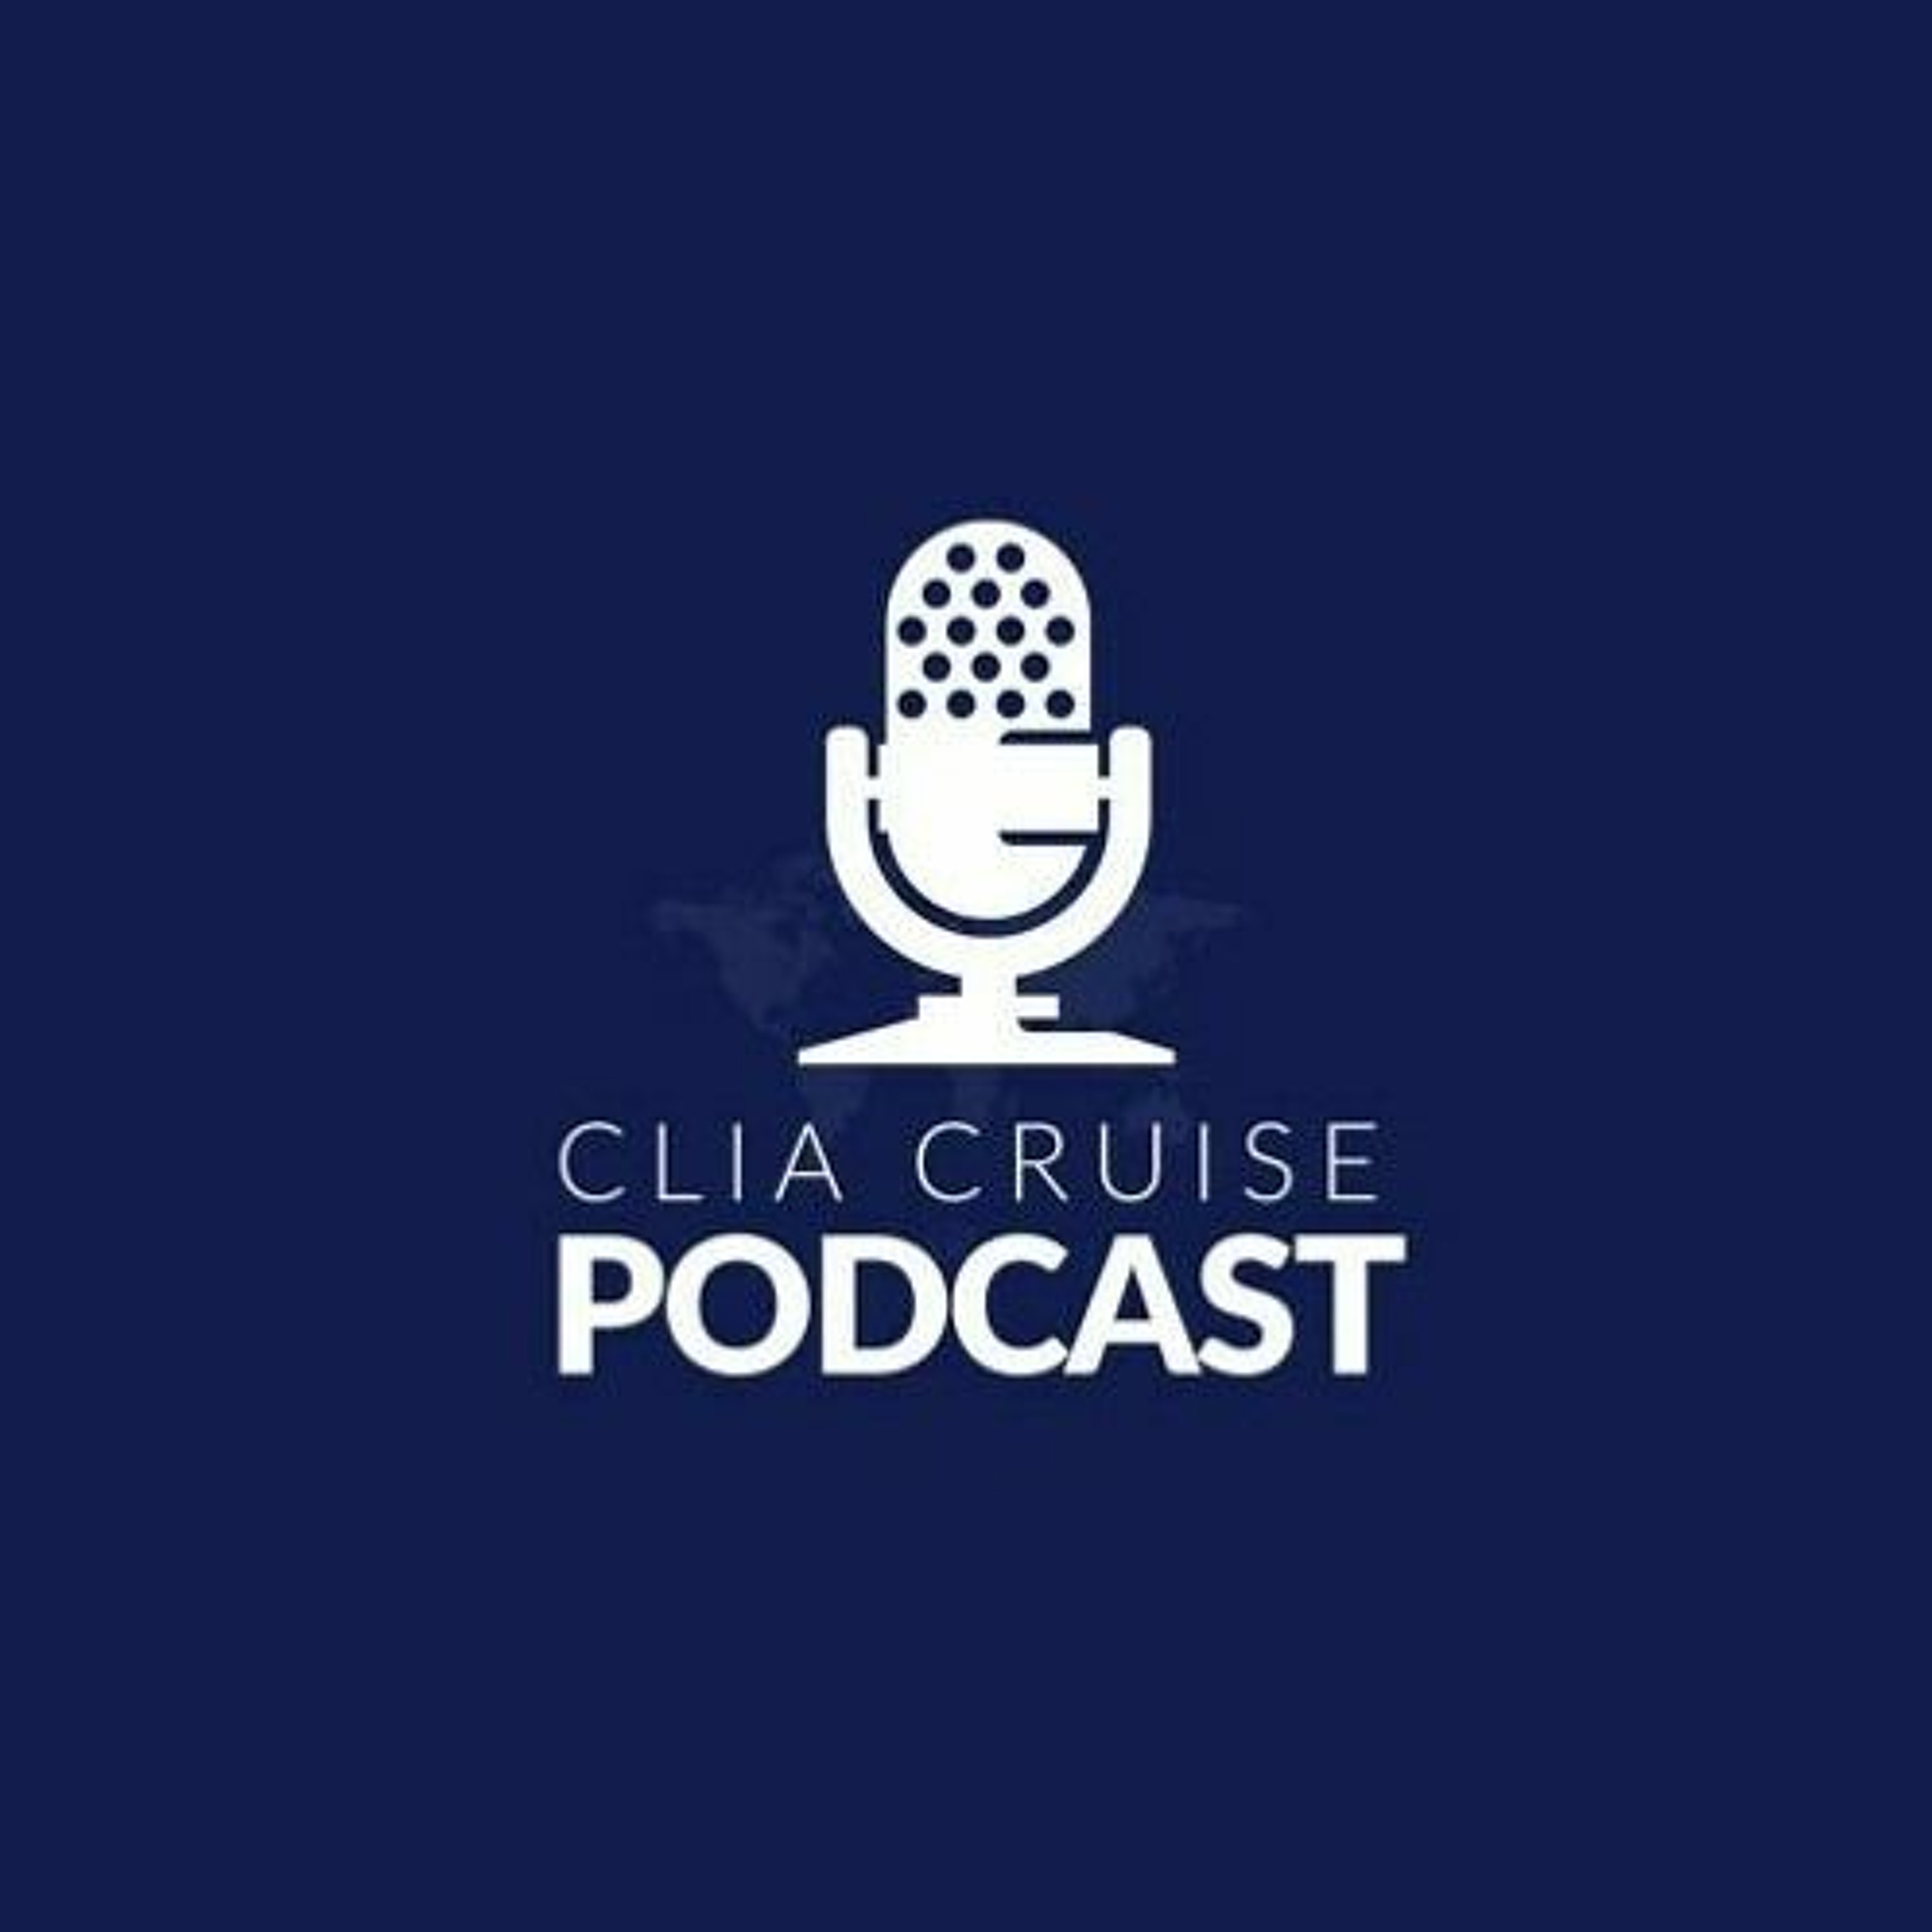 Episode 112 - Andy Harmer talks Expedition Cruising with Sarah Schlederer from Quark Expeditions